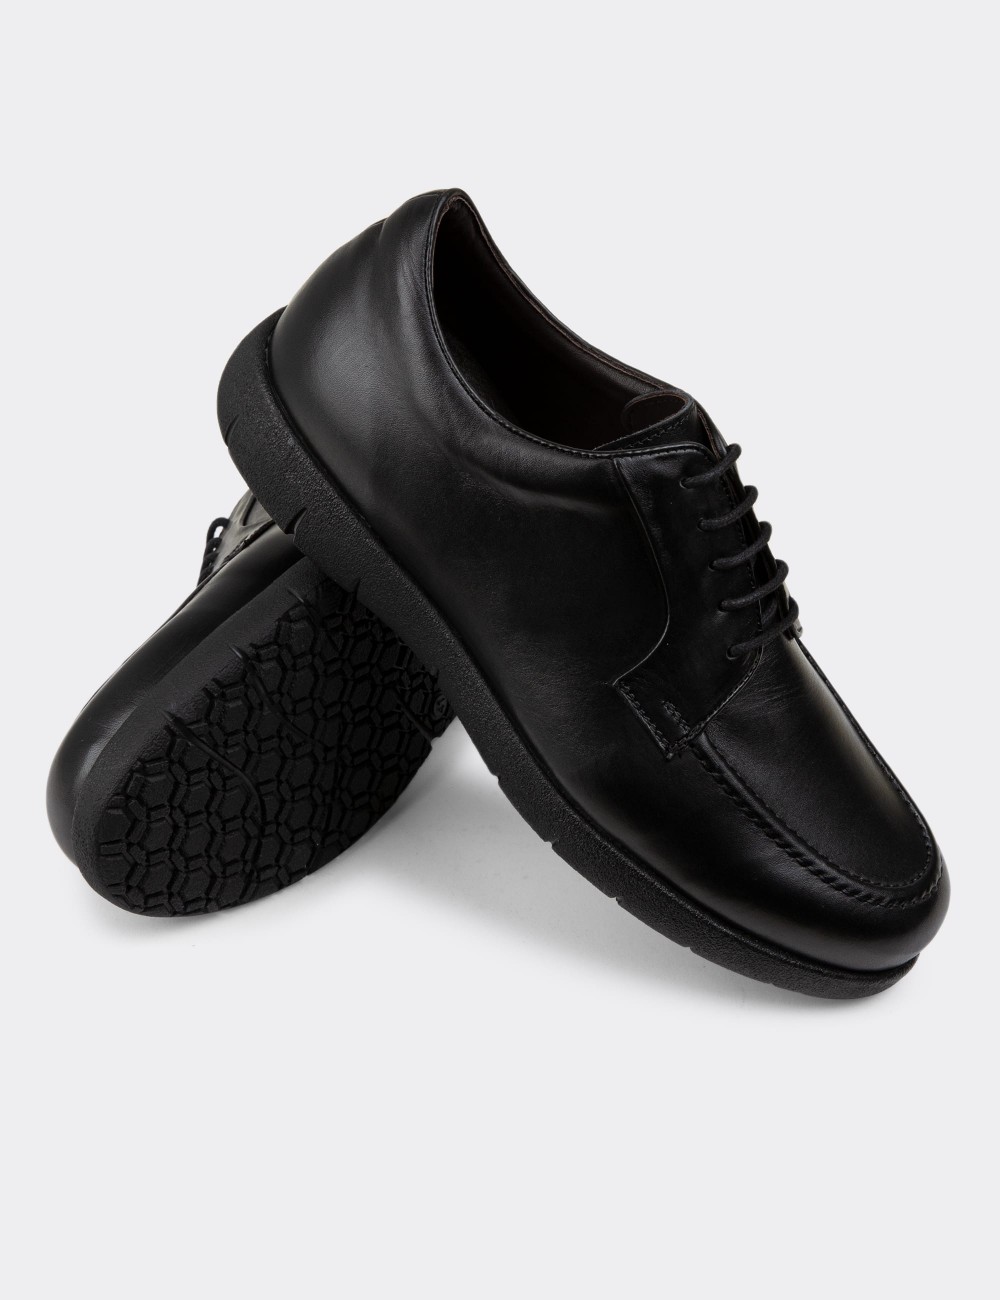 Black Leather Lace-up Shoes - 01930MSYHC03